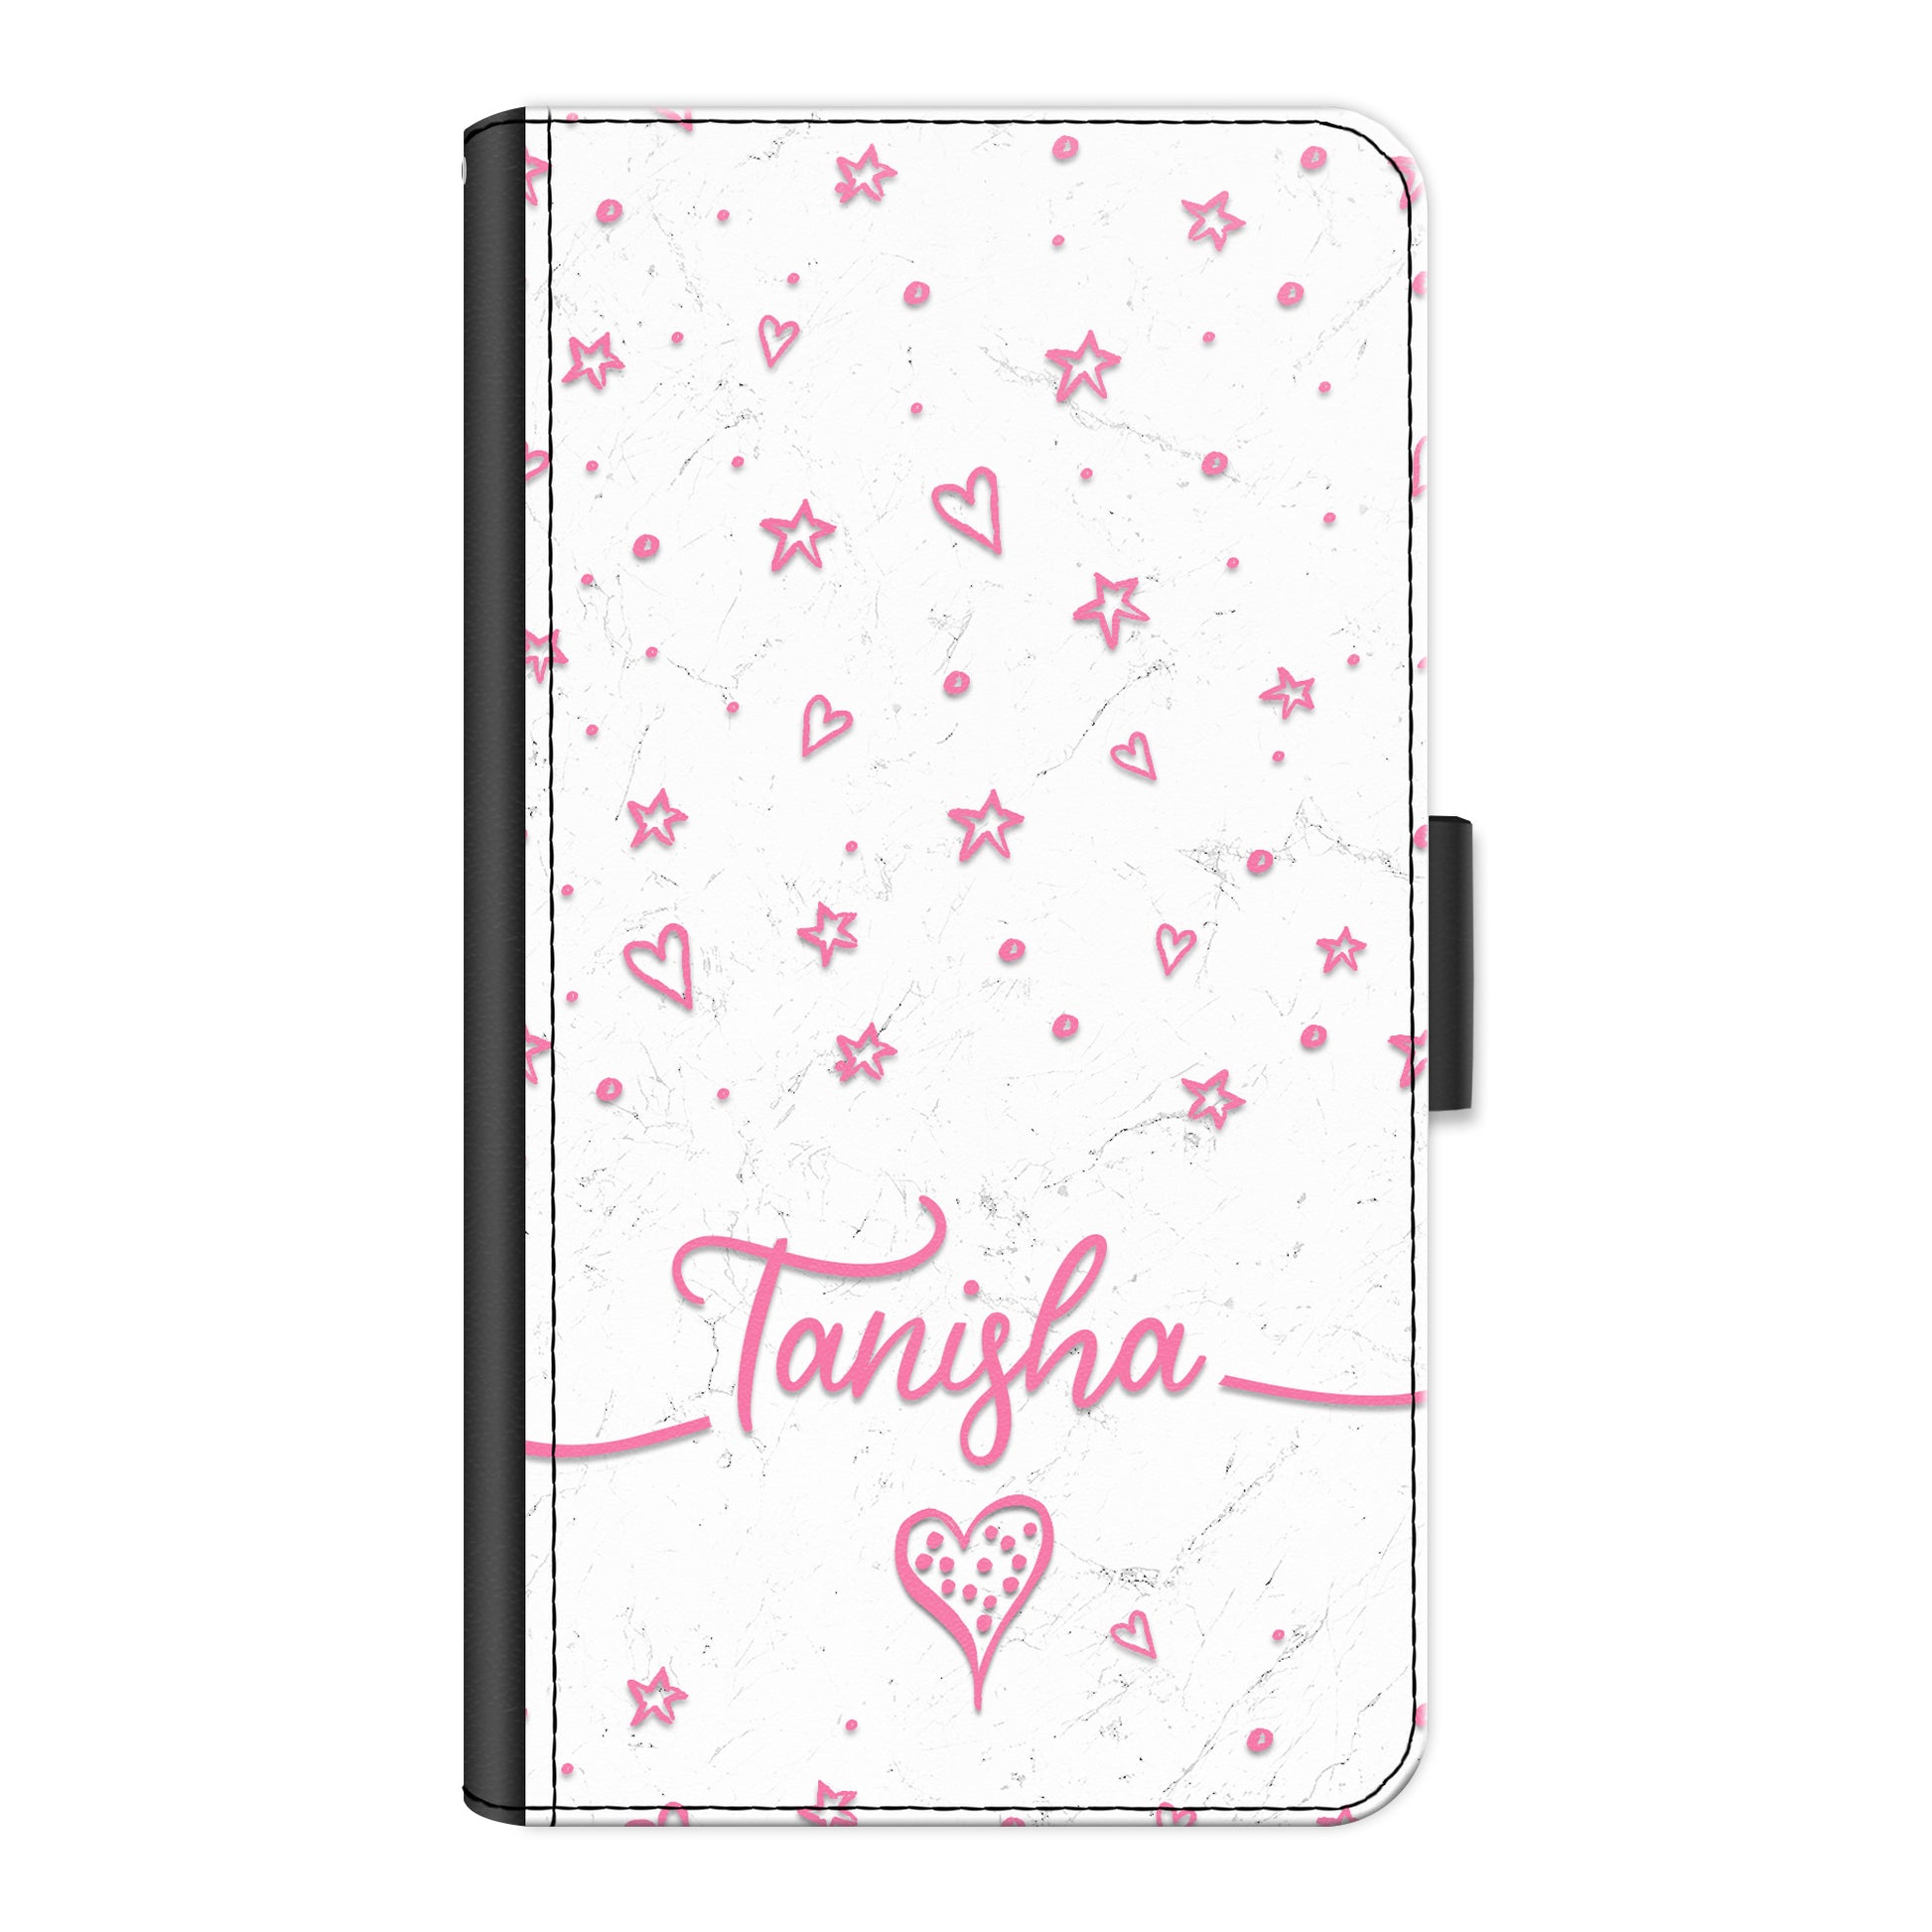 Personalised Oppo Phone Leather Wallet with Pink Stylish text, Stars and Hearts on White Marble